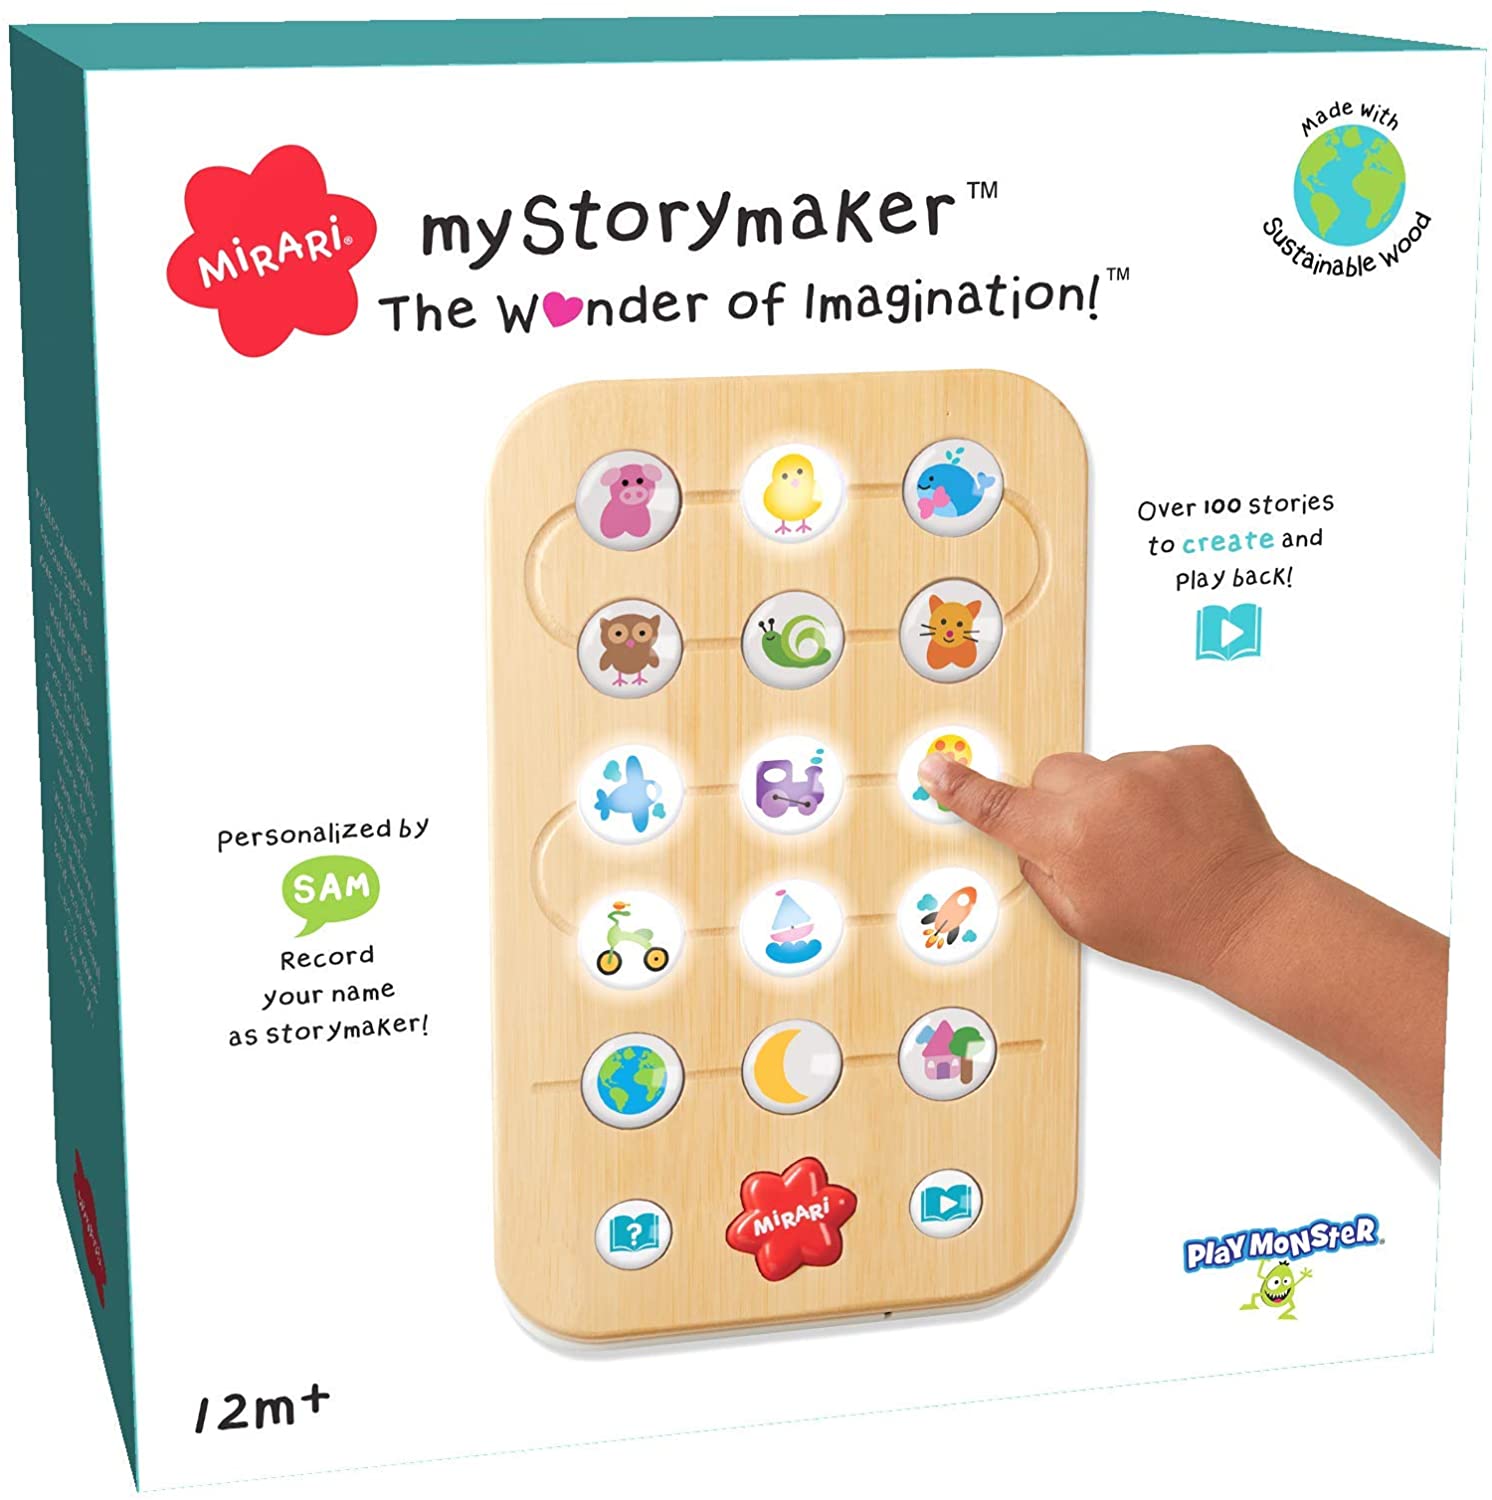 Playmonster Mirari Mystorymaker - The Wonder of Imagination! Light Up Story Maker $11.80 + Free Shipping w/ Amazon Prime or Orders $25+